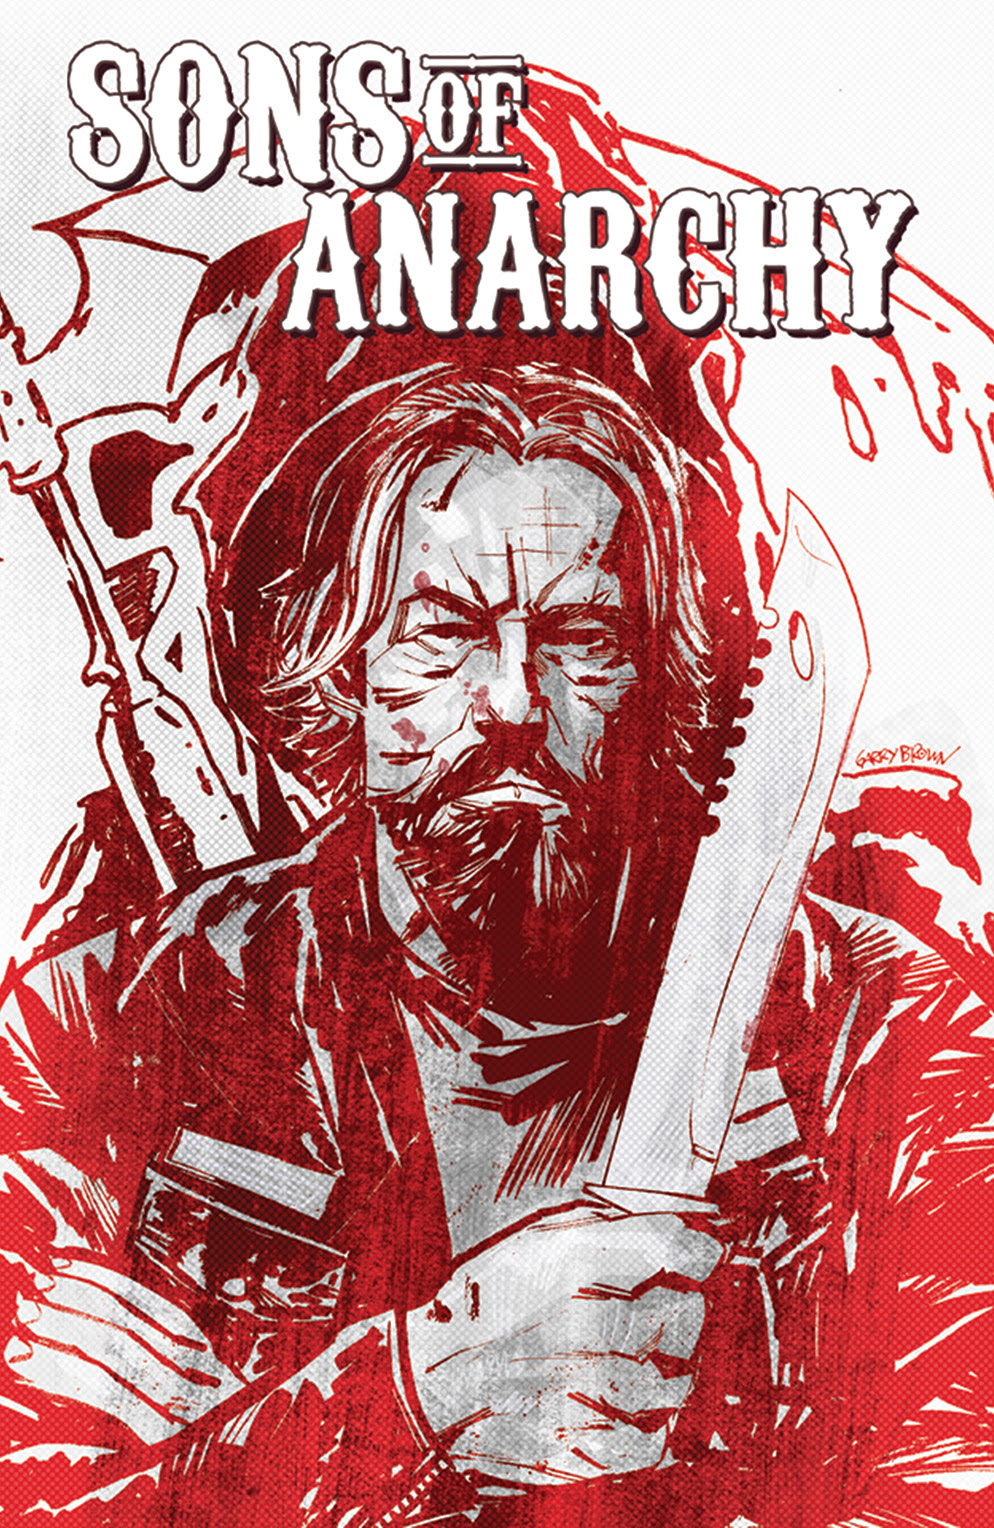 SONS OF ANARCHY #12 Cover by Garry Brown